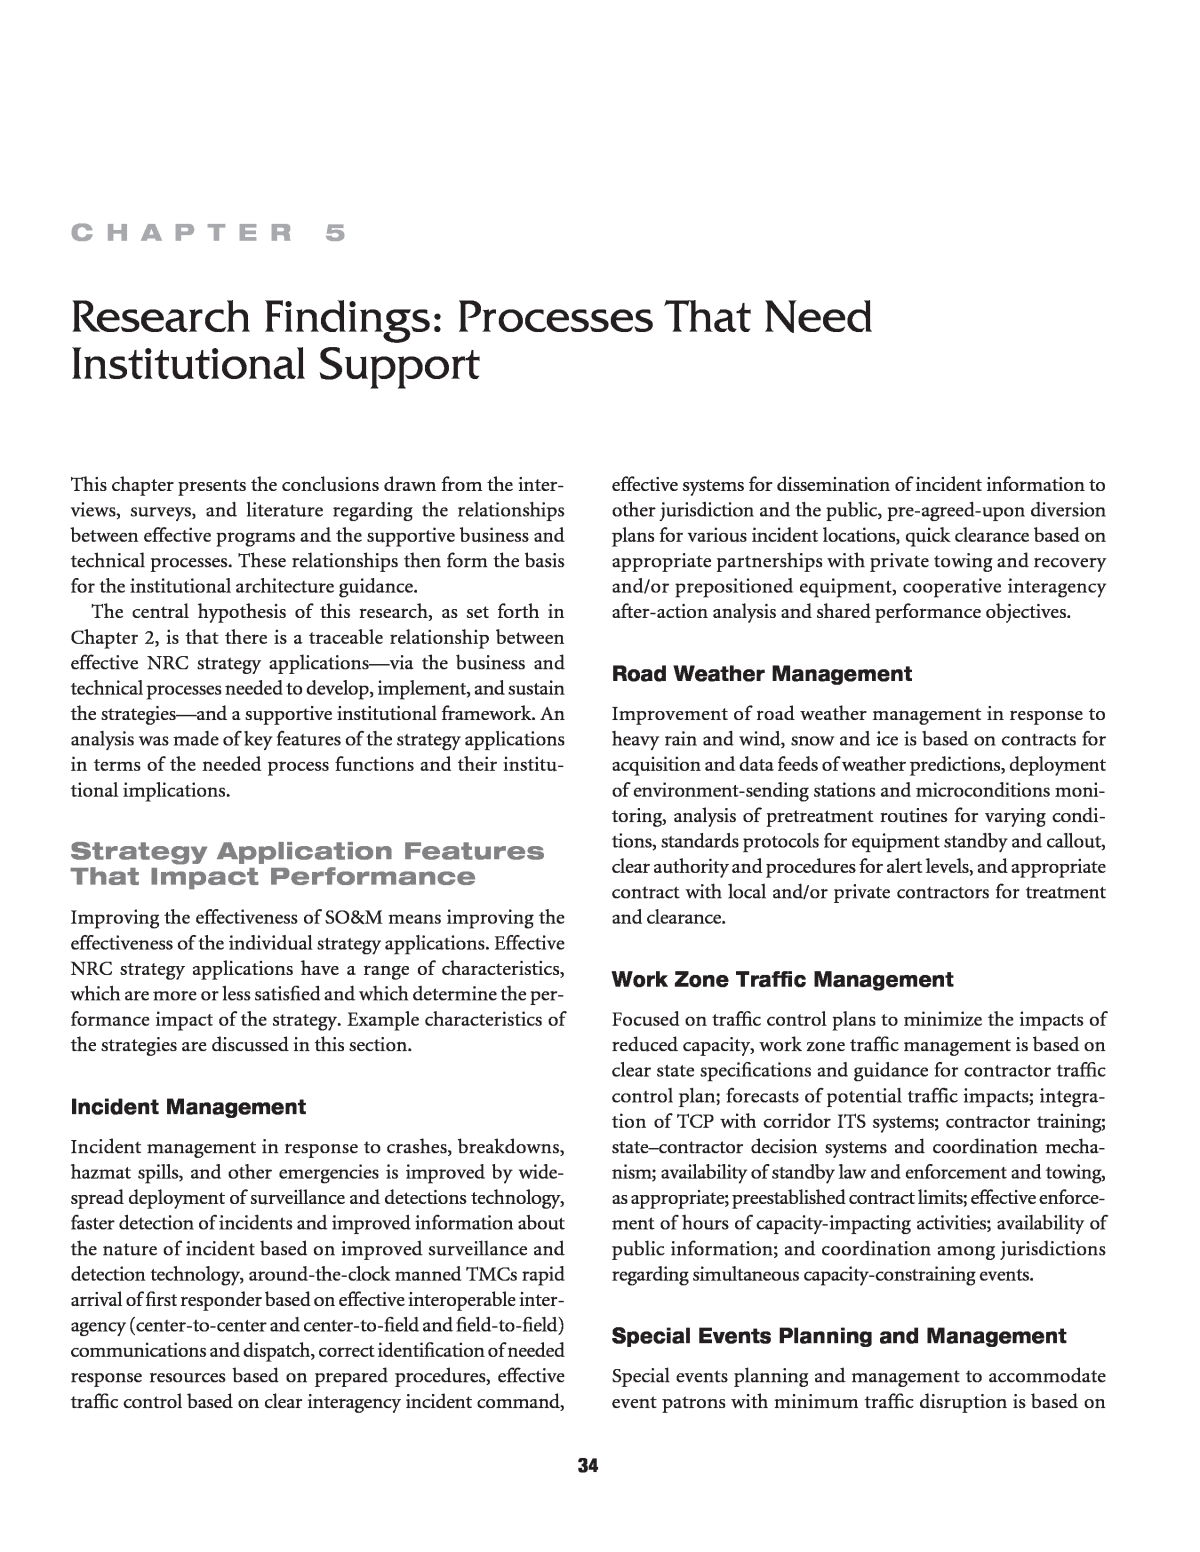 Chapter 29 - Research Findings: Processes That Need Institutional